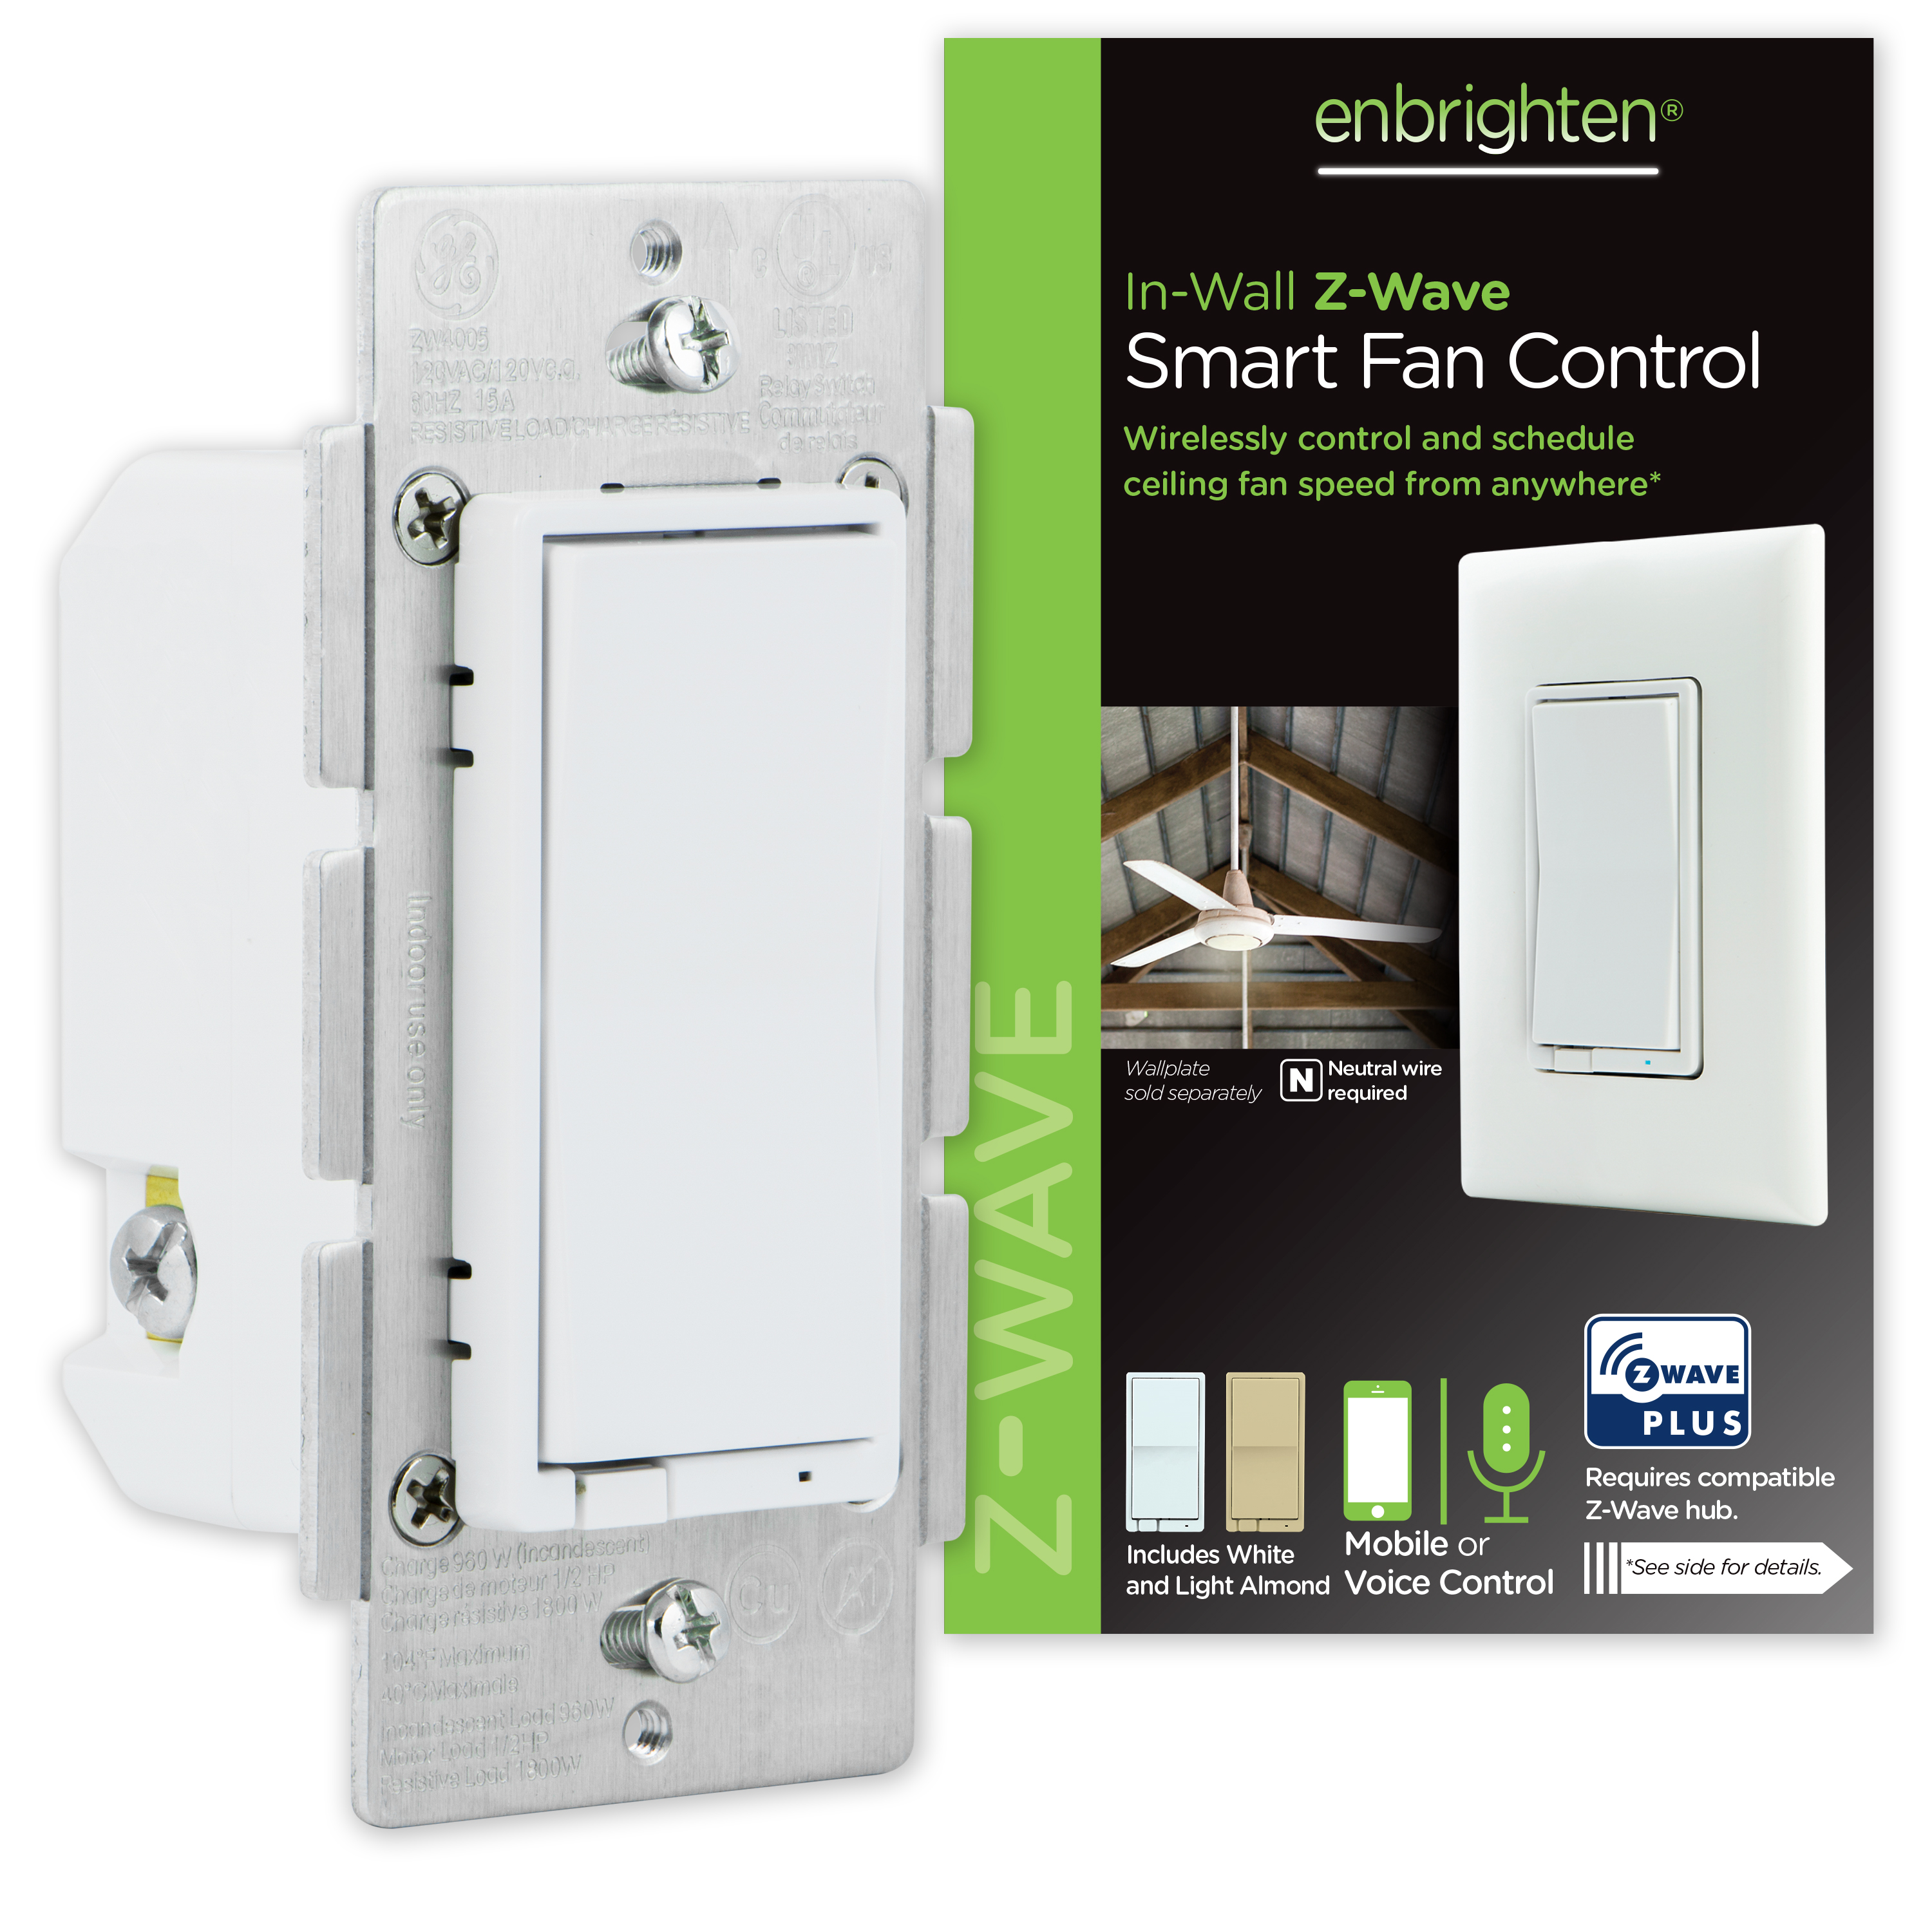 Enbrighten Electrical Switches Z-Wave Plus Smart Fan Control, 55258, White & Light Almond, 120V - image 1 of 11